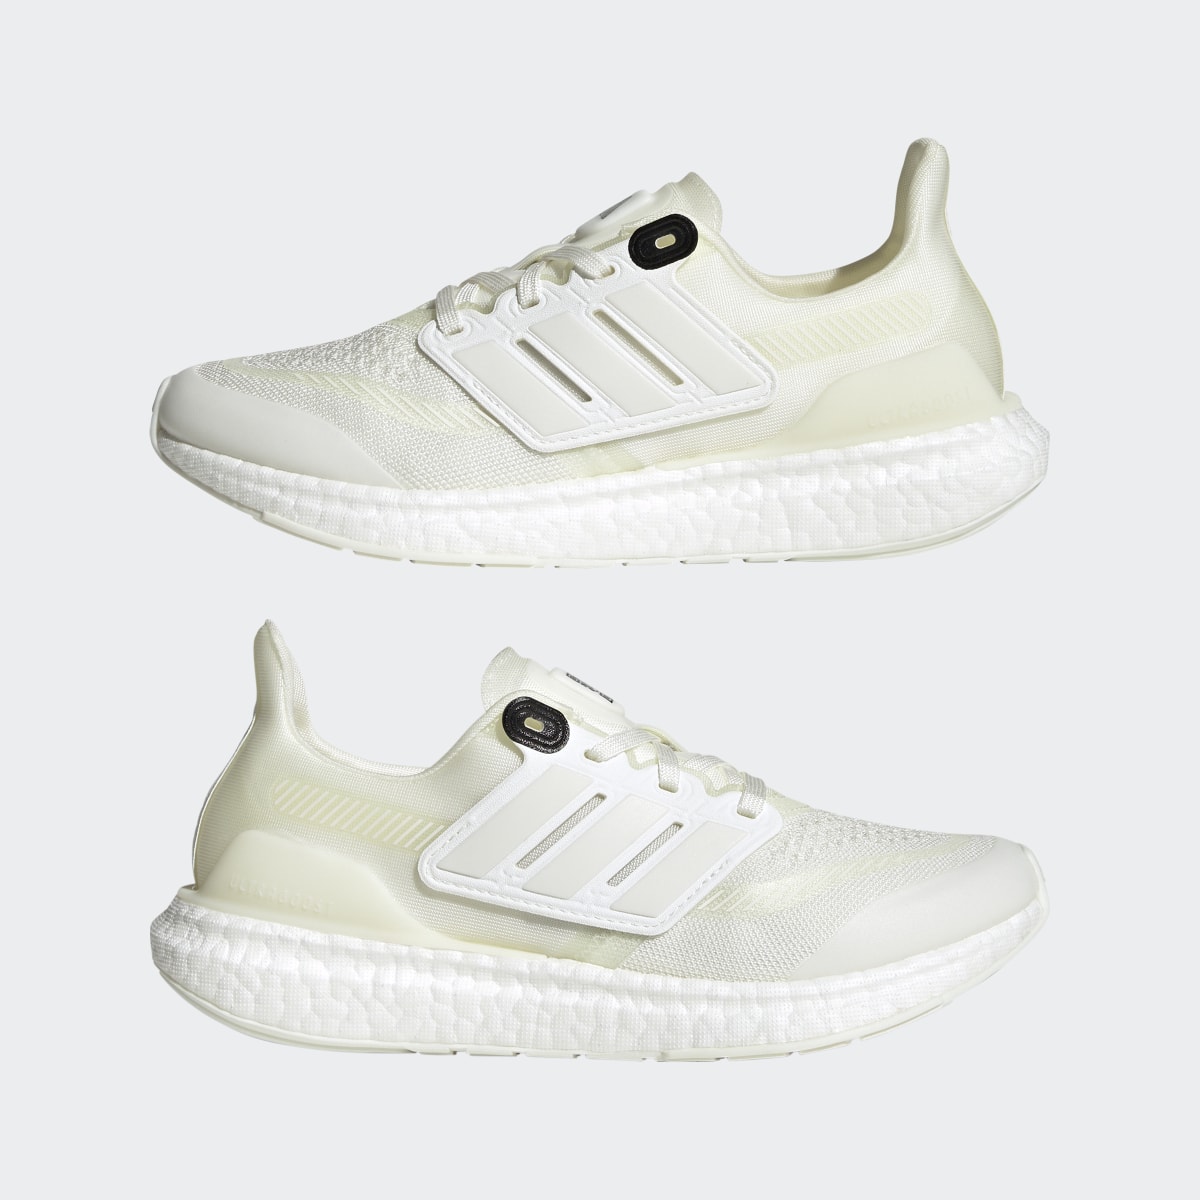 Adidas Ultraboost Made to be Remade 2.0 Laufschuh. 11